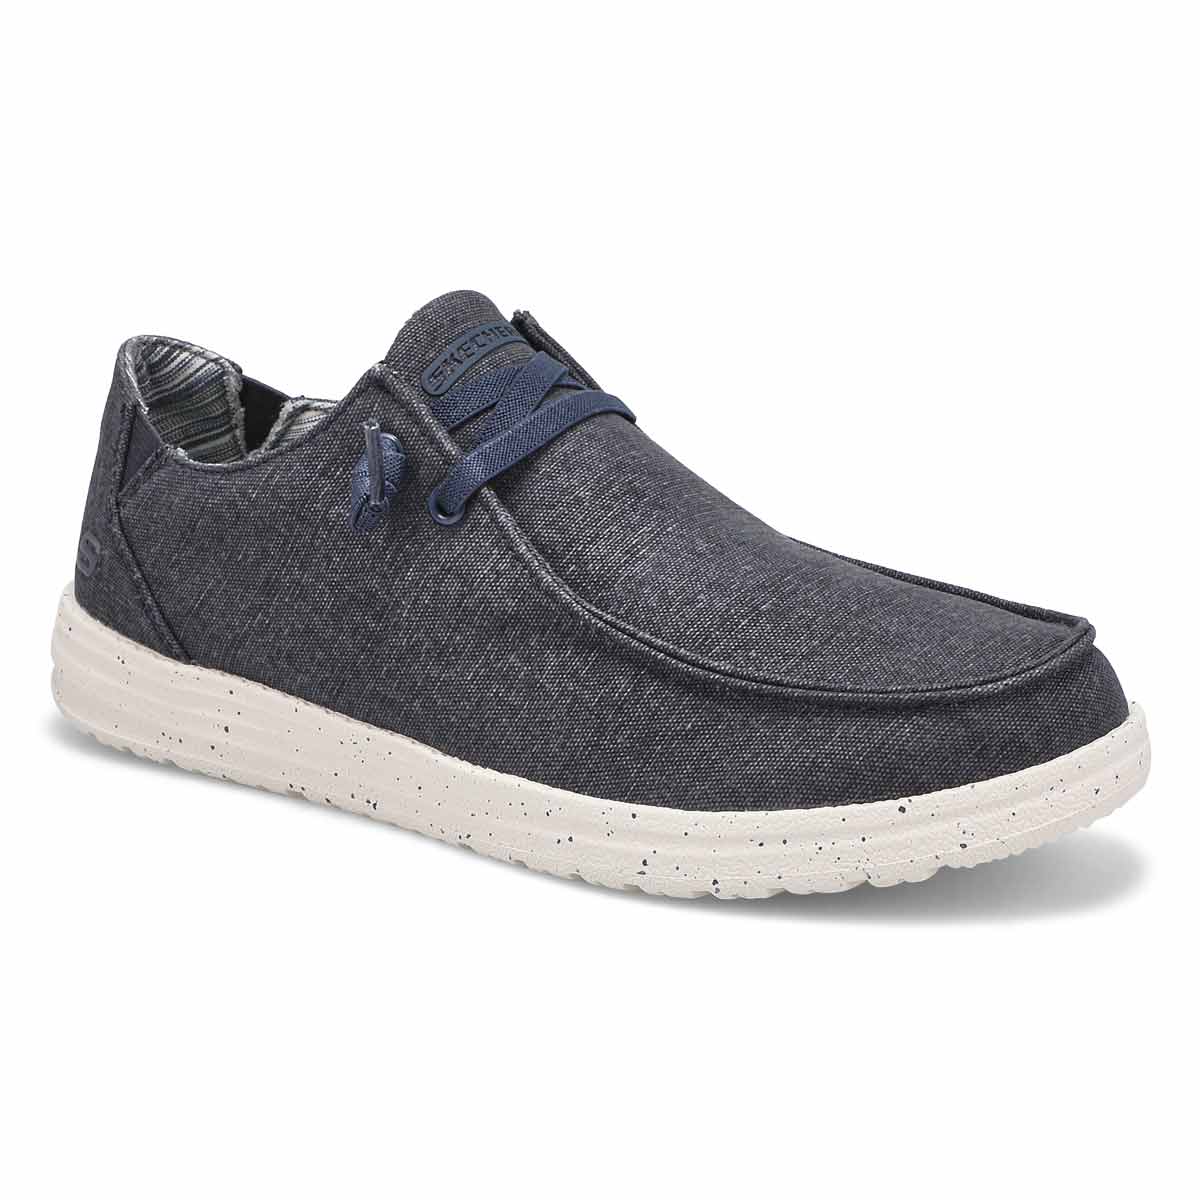 Men's Melson Chad Slip On Shoe - Navy